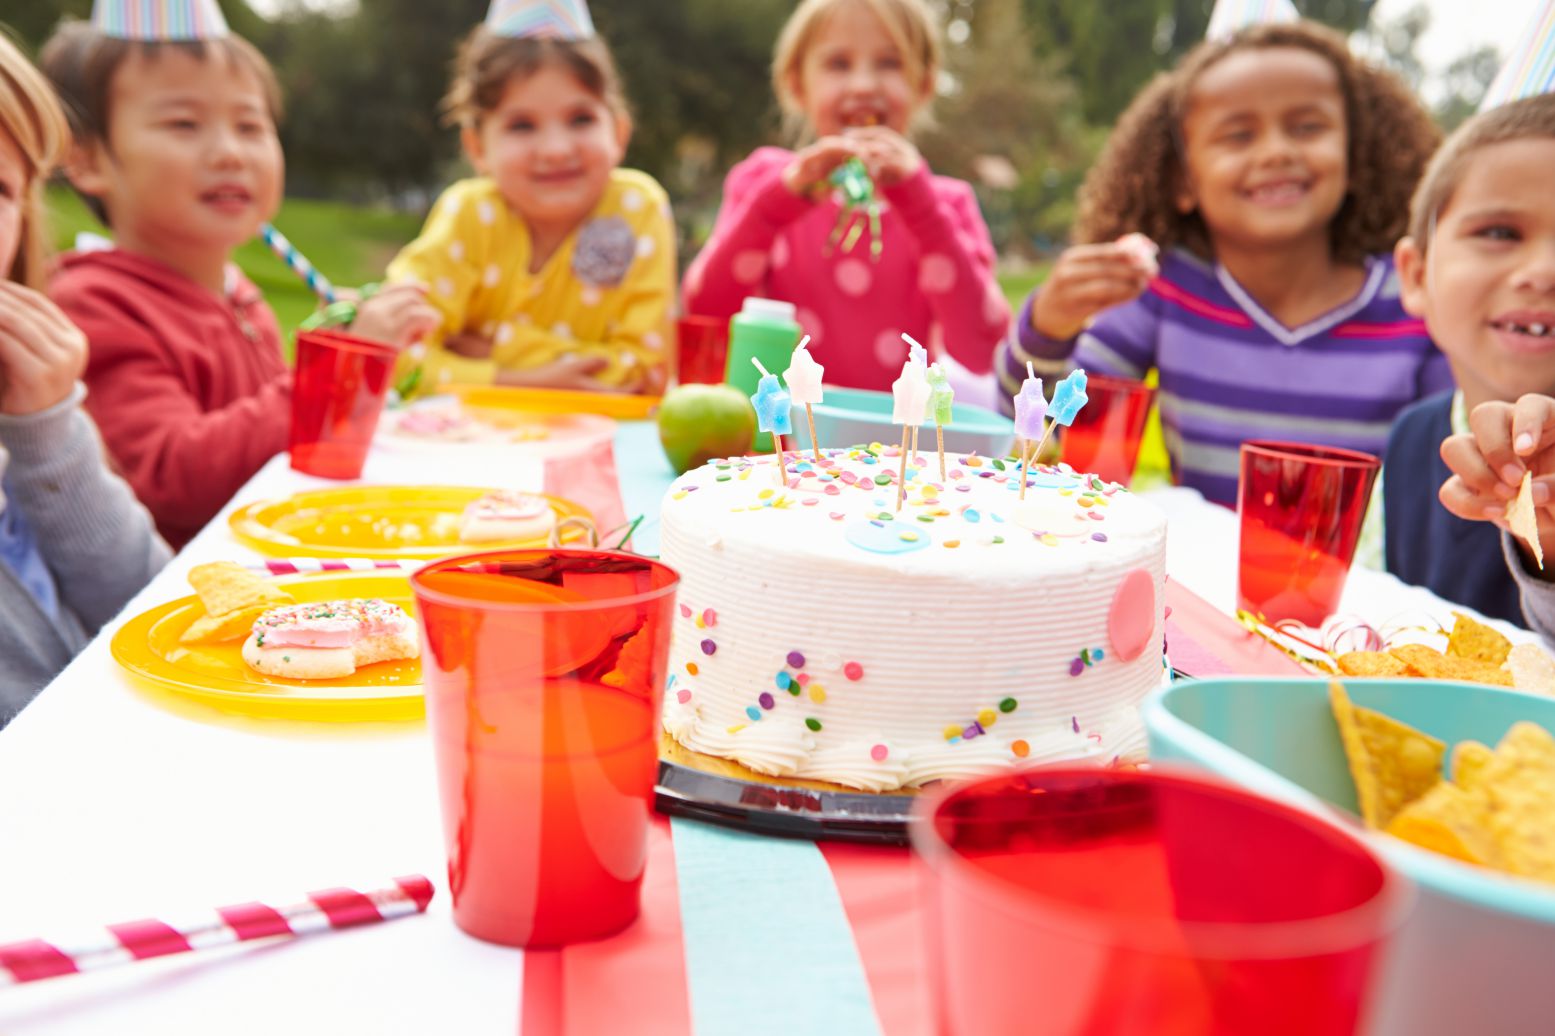 7 Easy Steps To Organize Your Kid's Birthday Party!